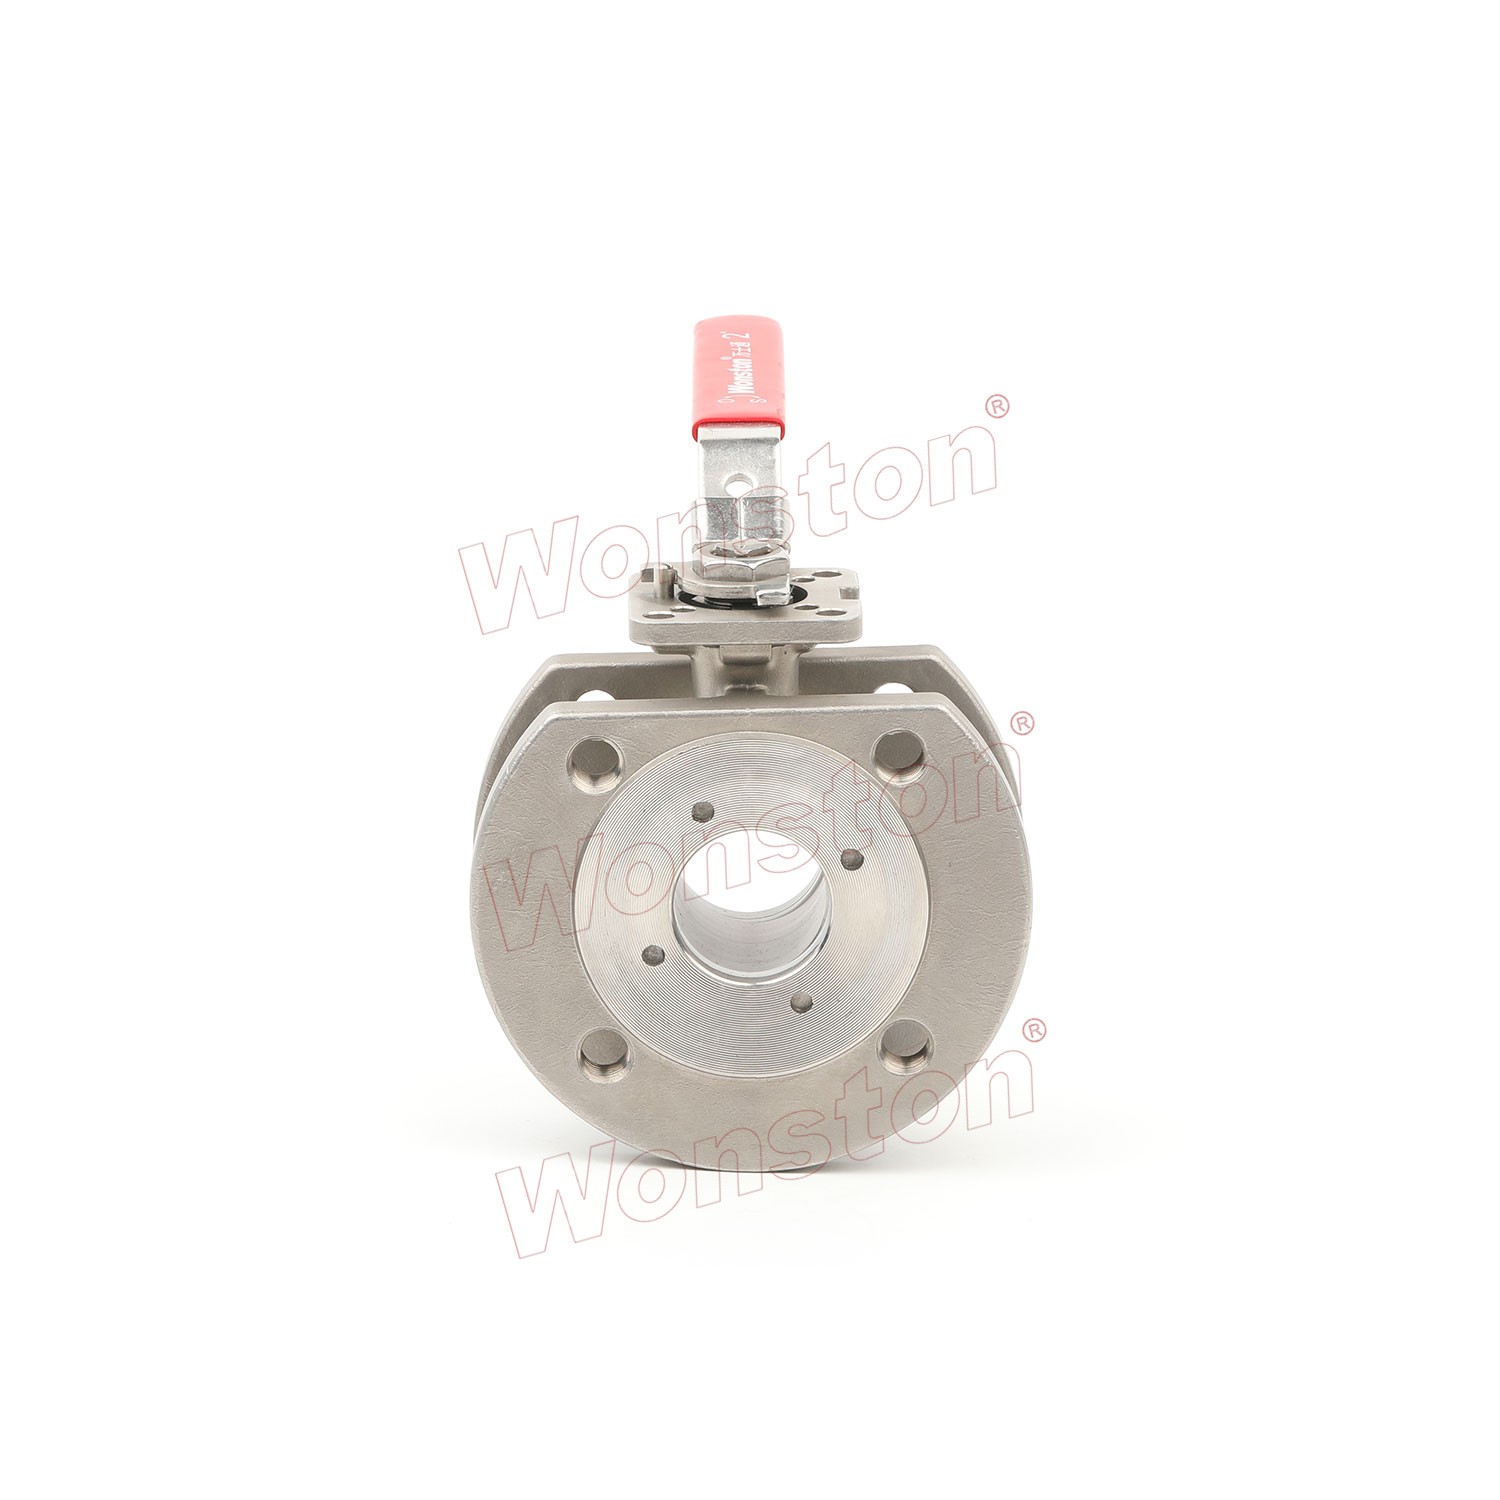 Wafer Type Ball Valve With Direct Mounting Pad